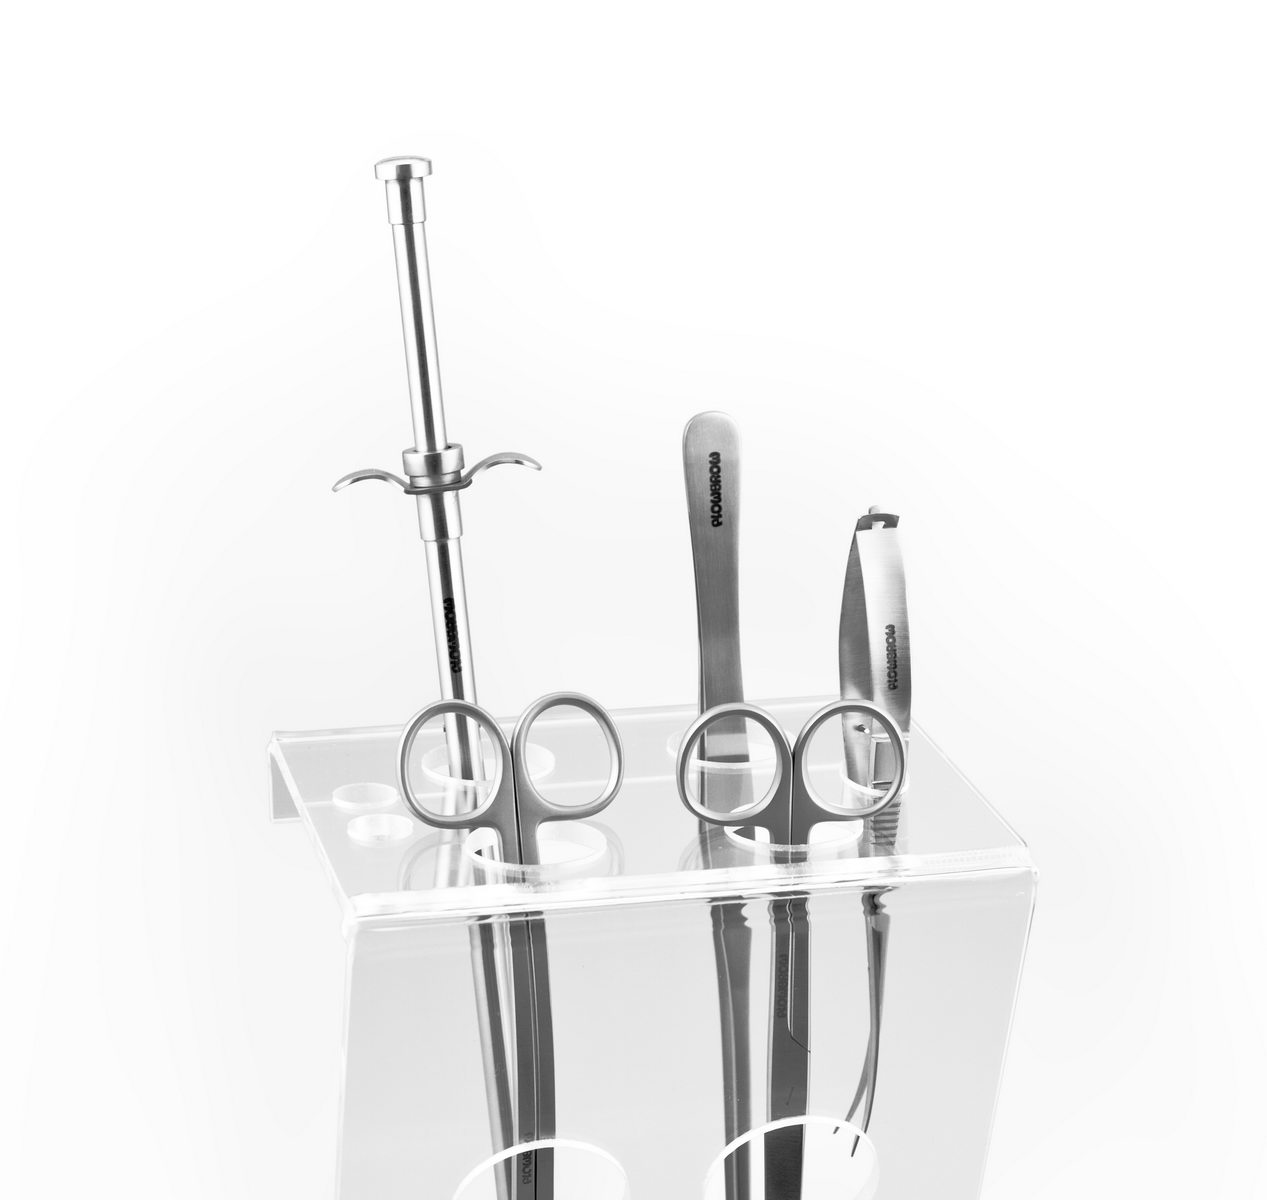 flowgrow-tool-stand-002 resize